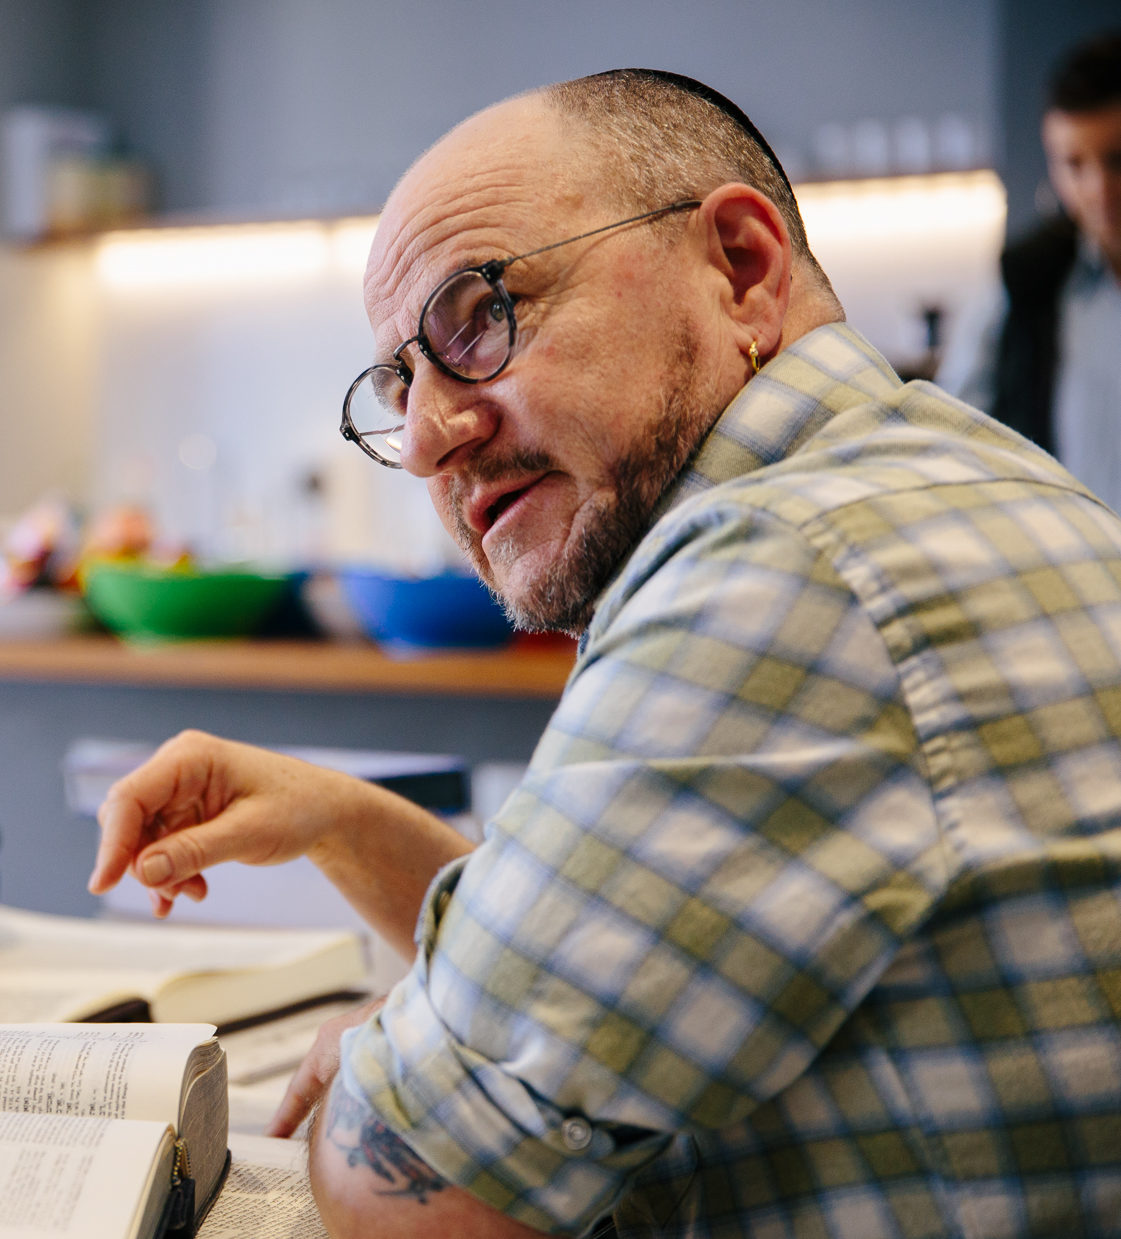 Jhos Singer sits in the bet midrash. There is a volume of Talmud in front of him and he glances towards someone standing outside of the frame. Jhos is wearing a checkered button-up shirt with the sleeves rolled to his elbows.